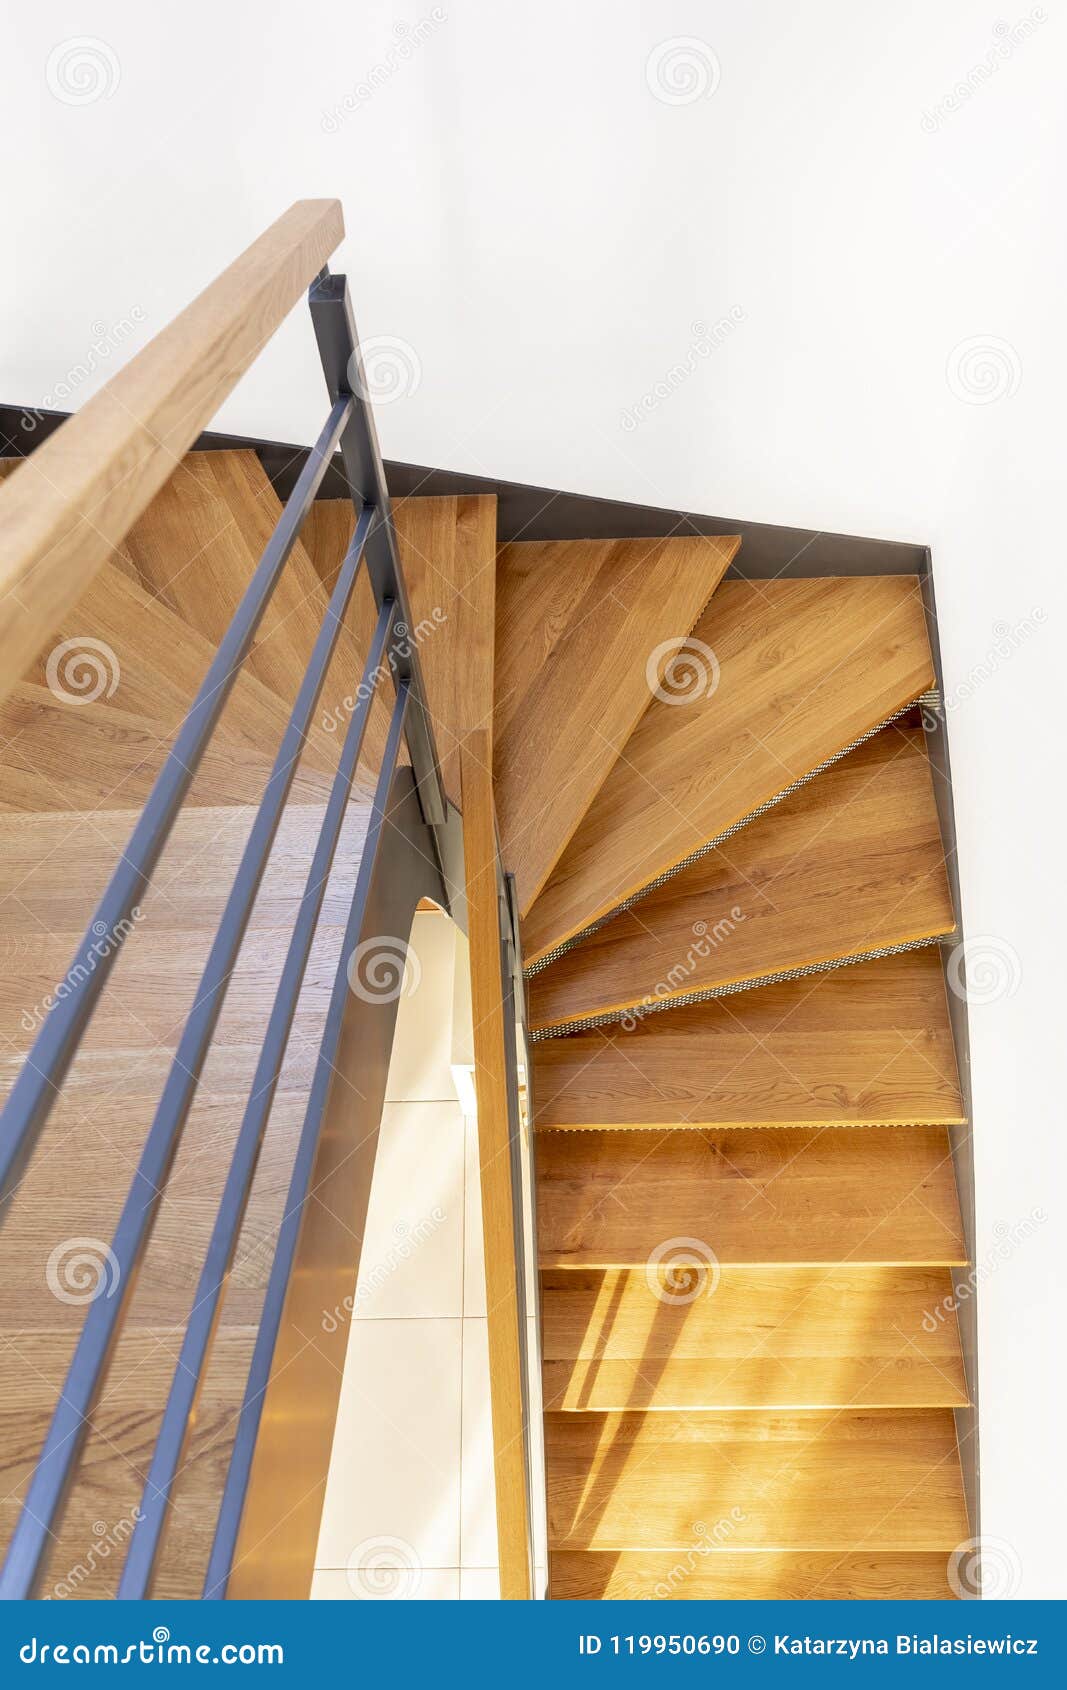 Top View Of A Wooden Staircase With White Wall And Metal